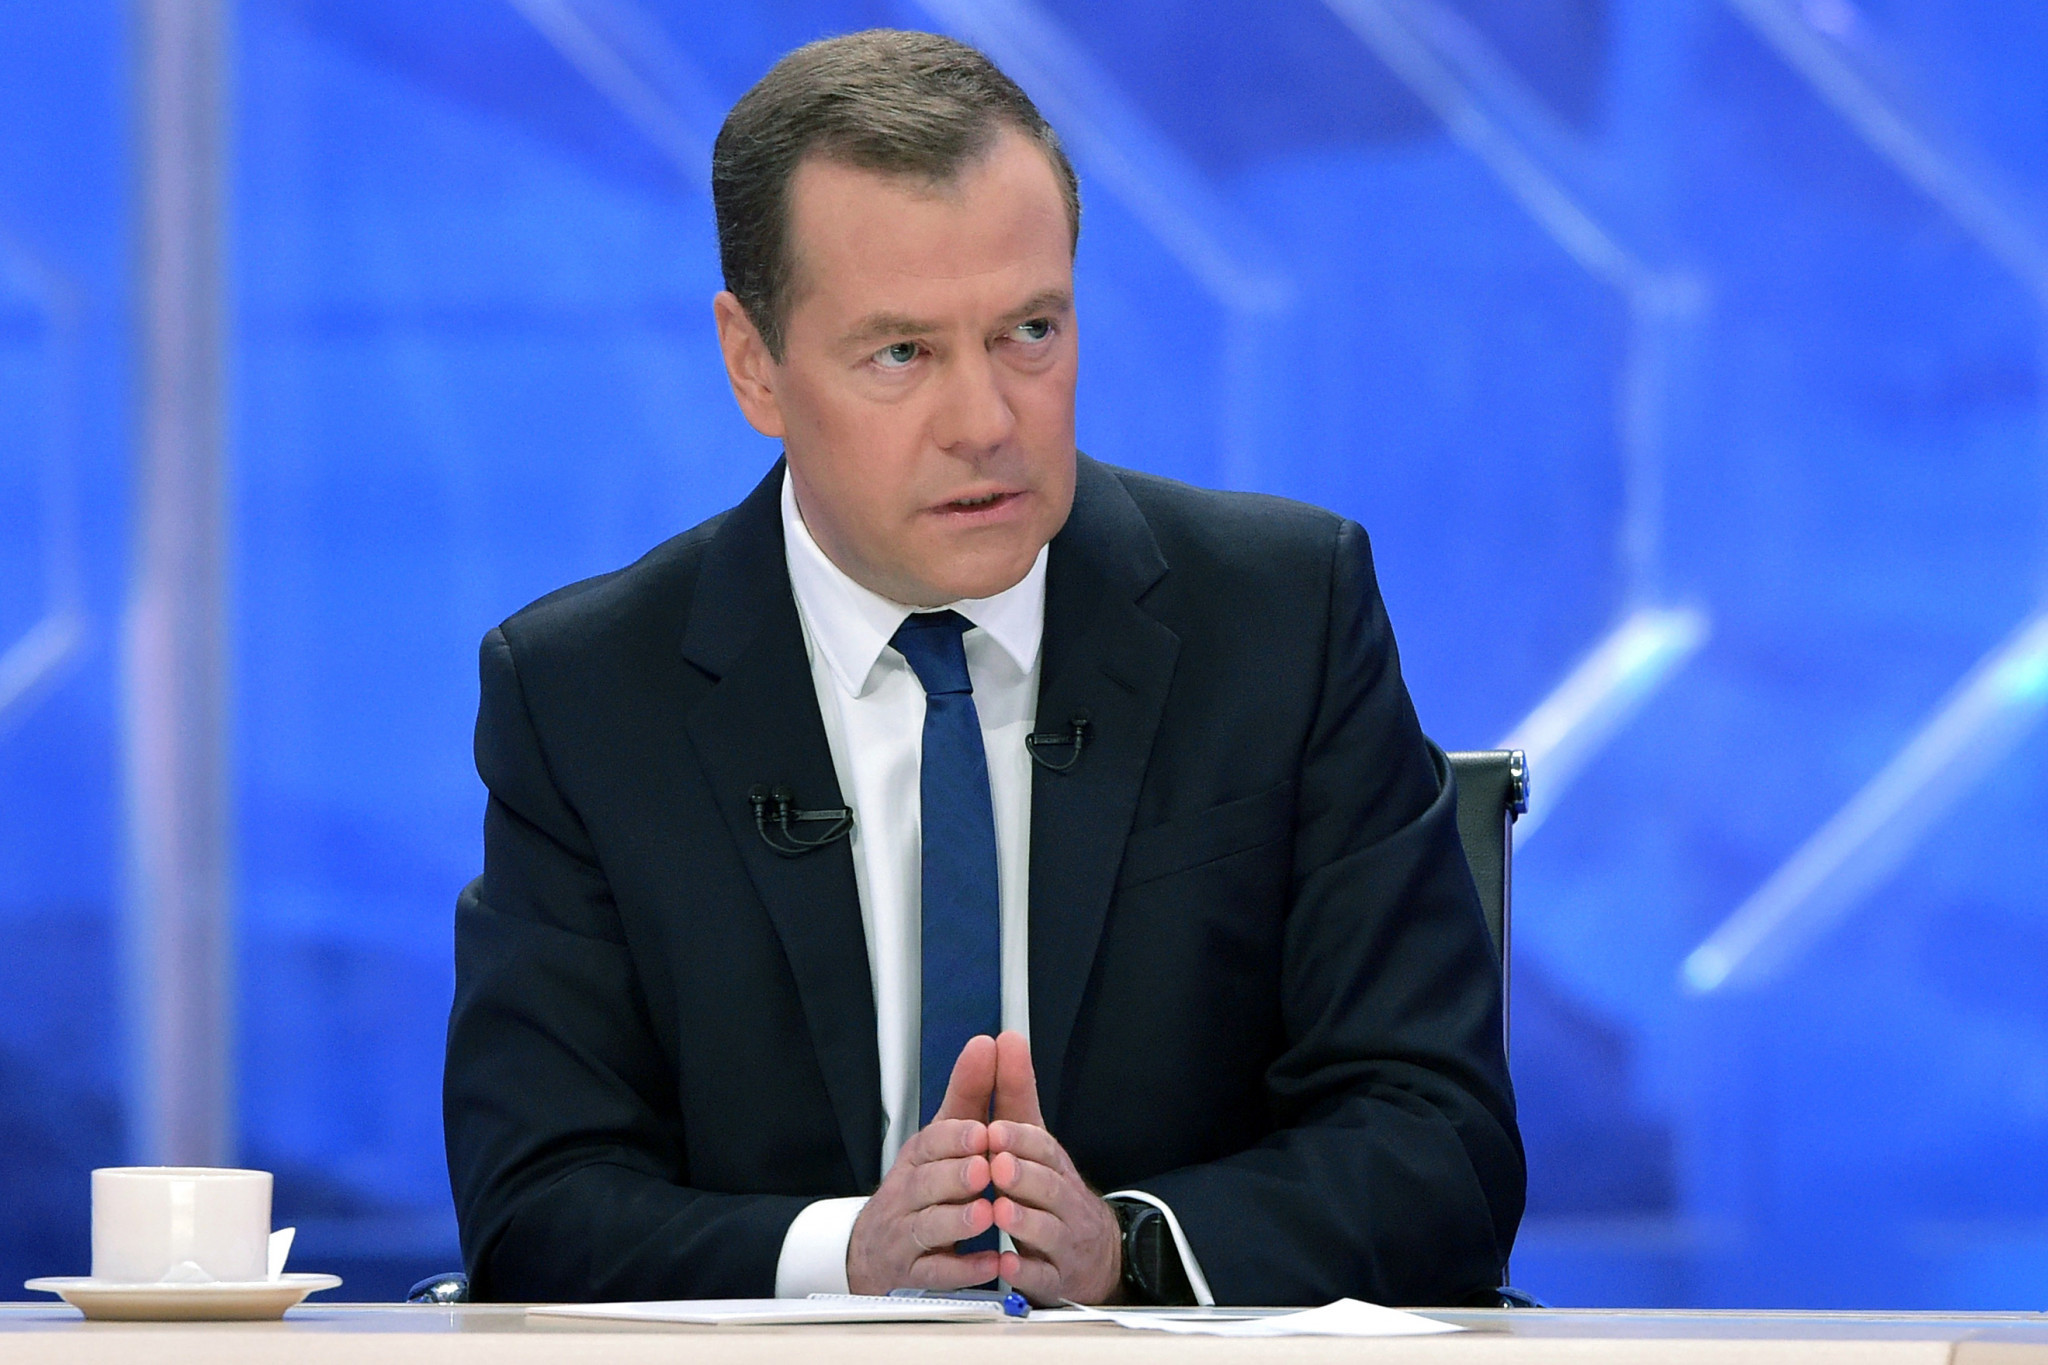 Dmitry Medvedev confirmed there would be a competition for athletes banned from Pyeongchang 2018 ©Getty Images